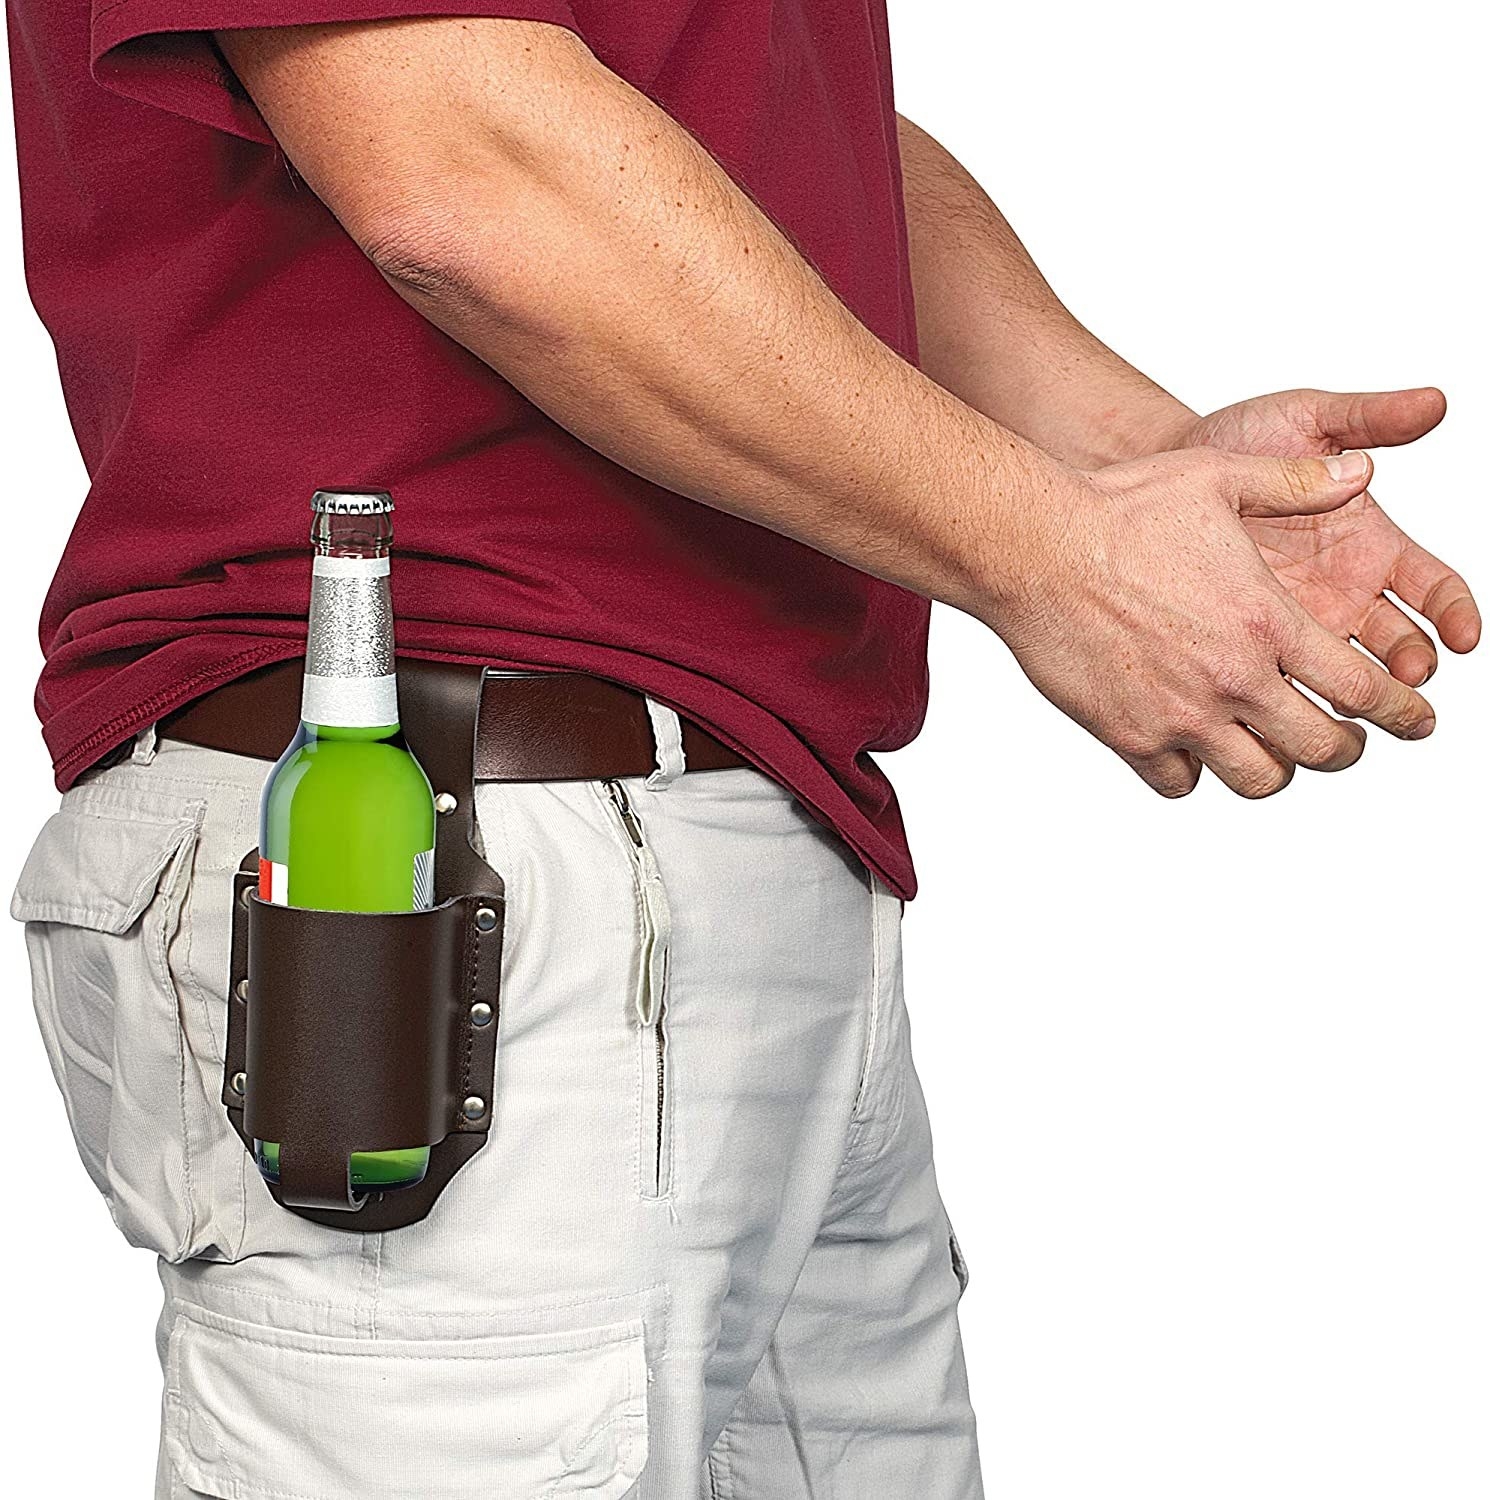 Image of someone wearing the beer holster